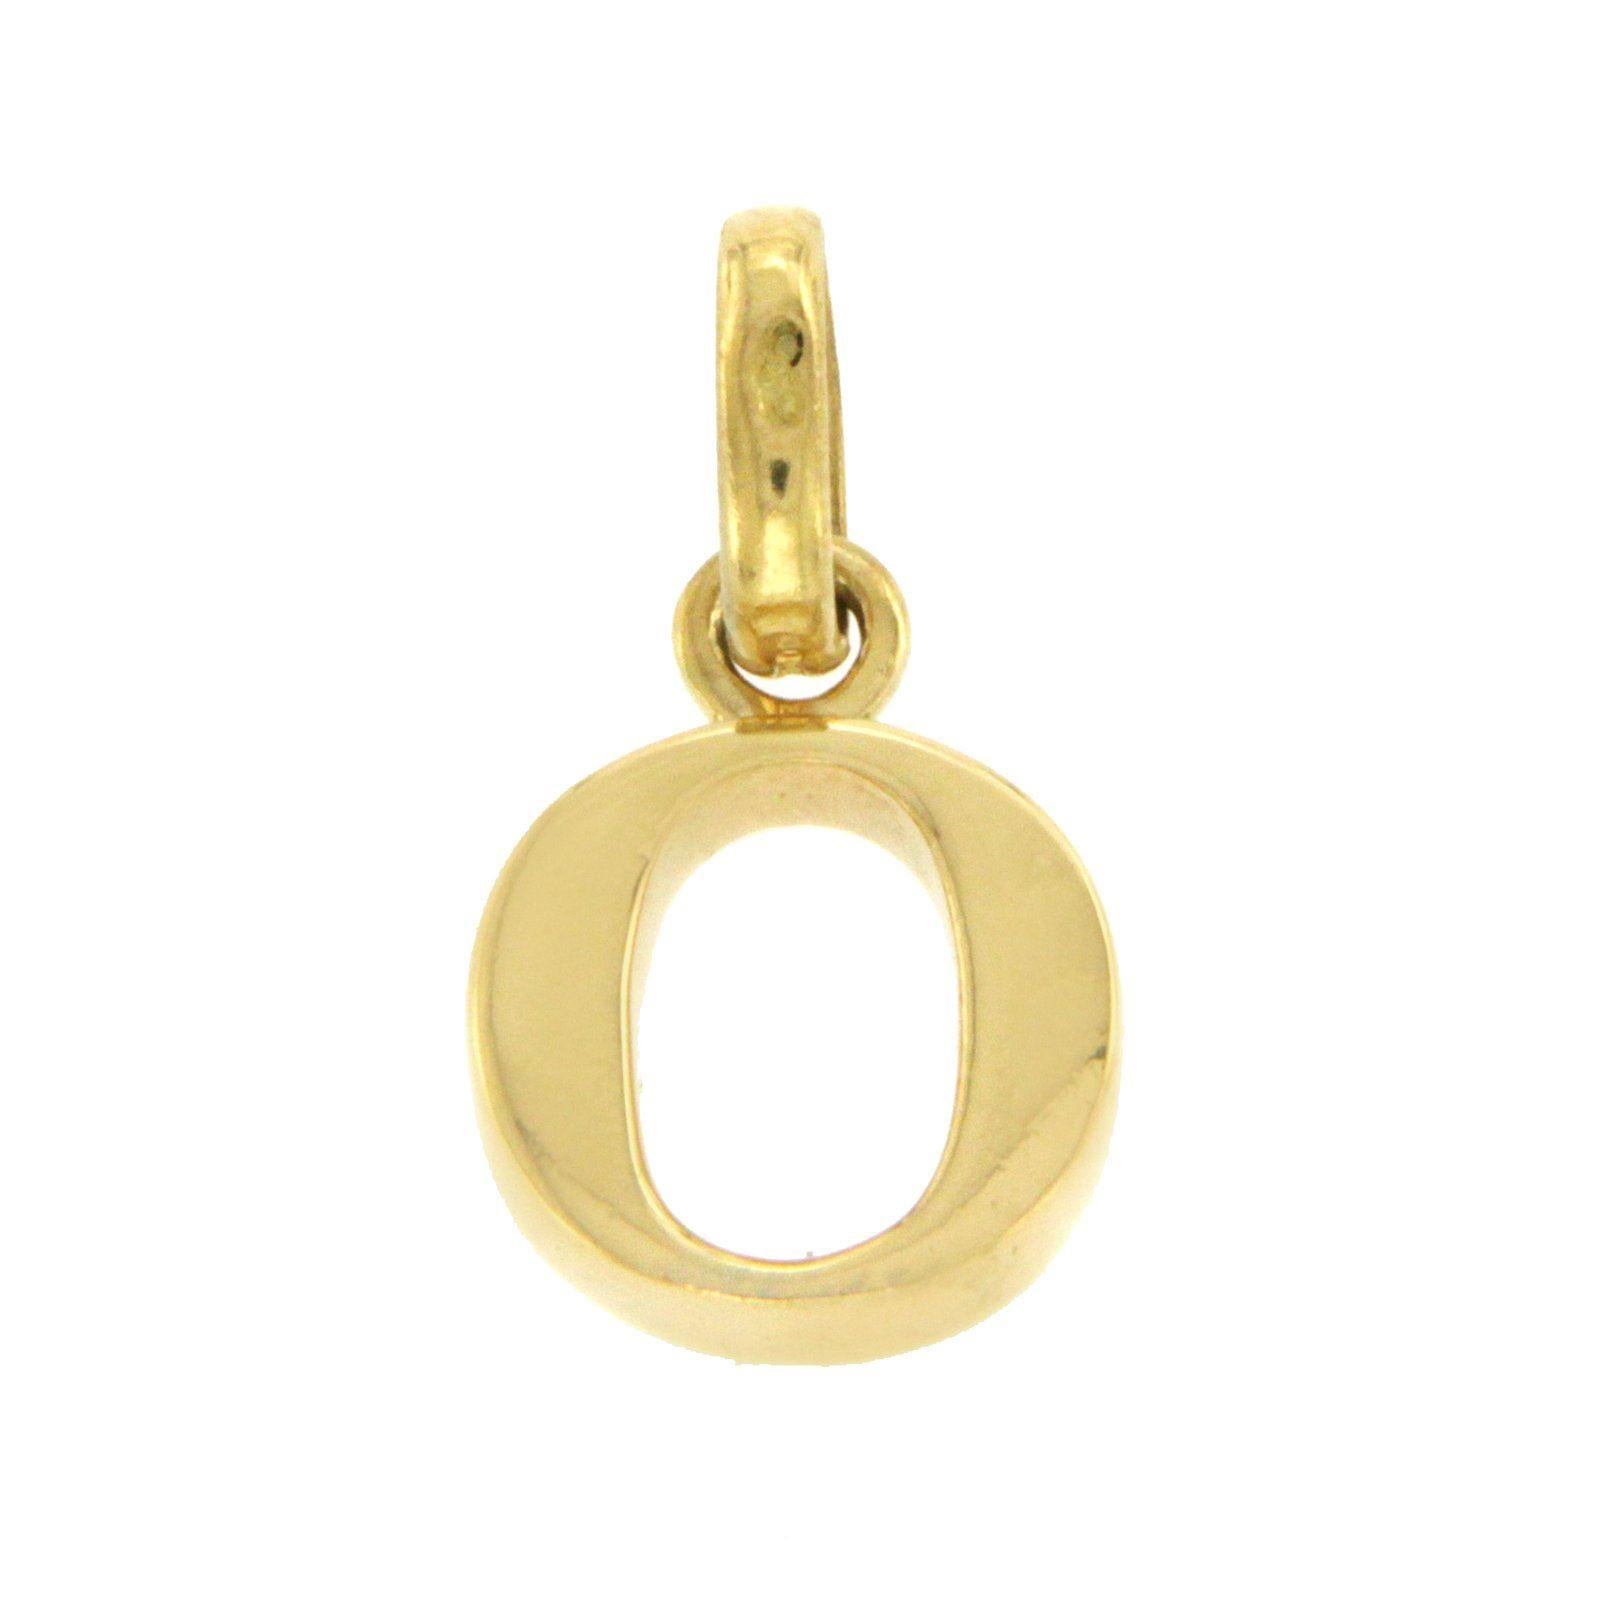 Height: 21 mm
Width: 11.5 mm
Metal: 18K Yellow Gold 
Stone Type: None
Hallmark: Links of London Trademark
Total Weight: 3.4 Grams
Condition: Pre Owned
Estimated Retail Price: $795
Stock Number: U321